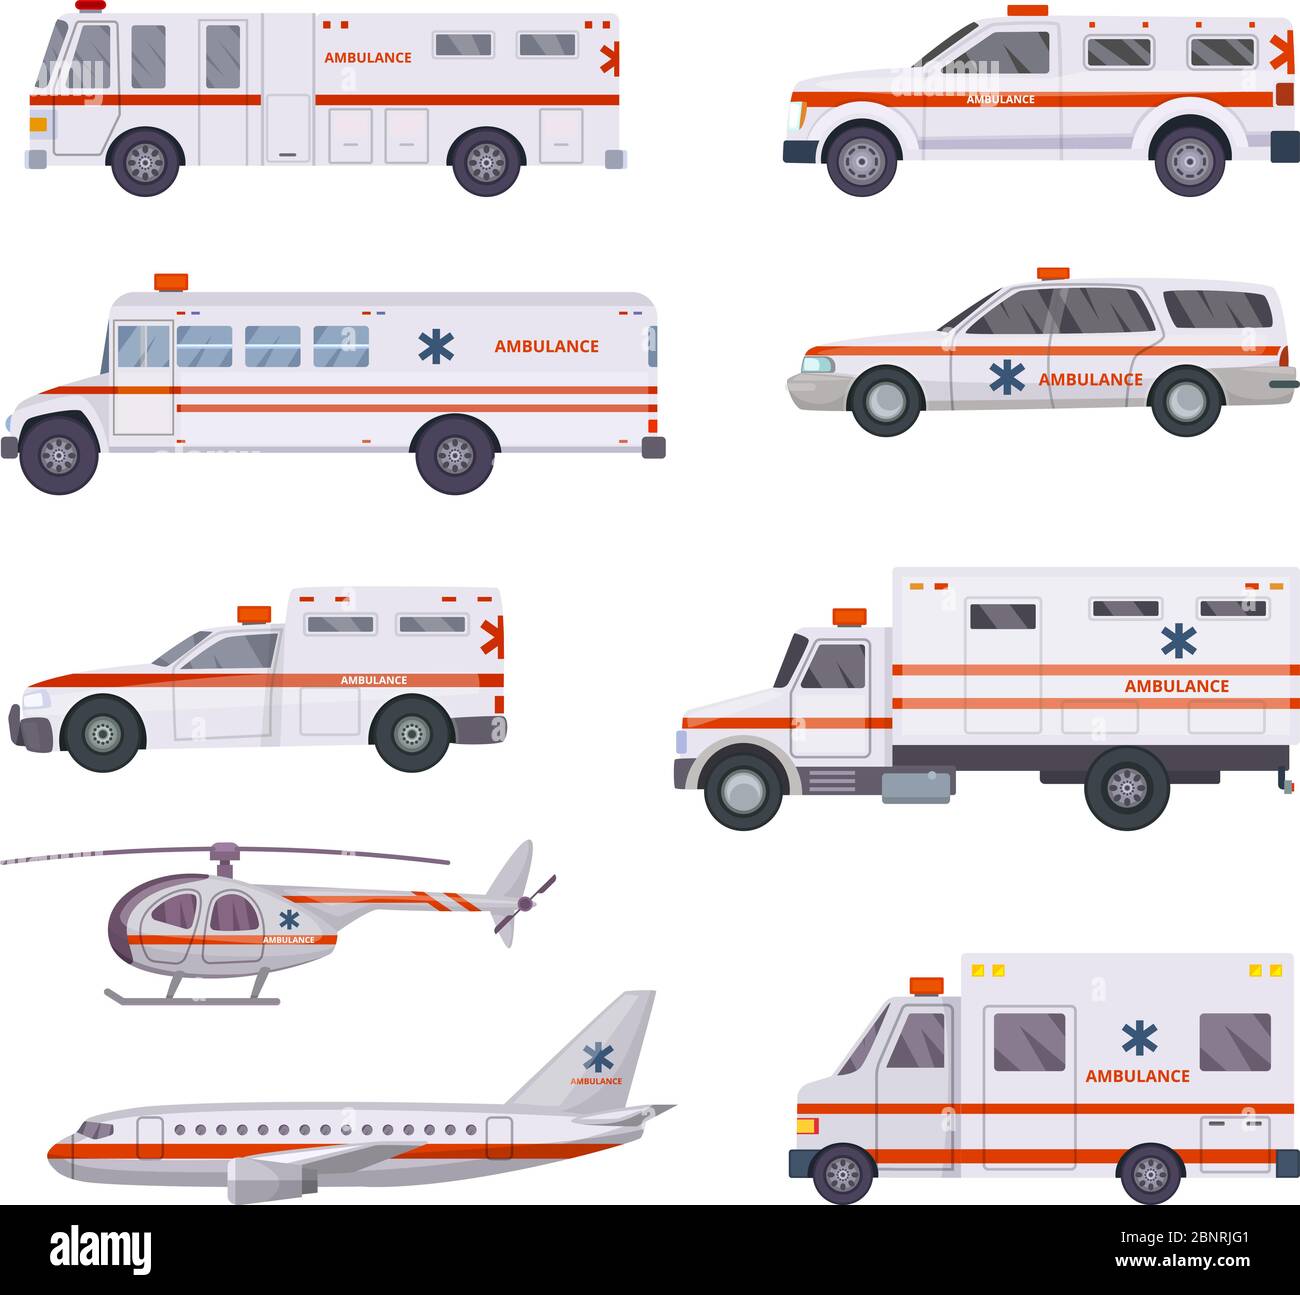 Ambulance cars. Health rescue service vehicle van helicopter paramedic emergency hospital urgent auto 911 vector cartoon pictures Stock Vector